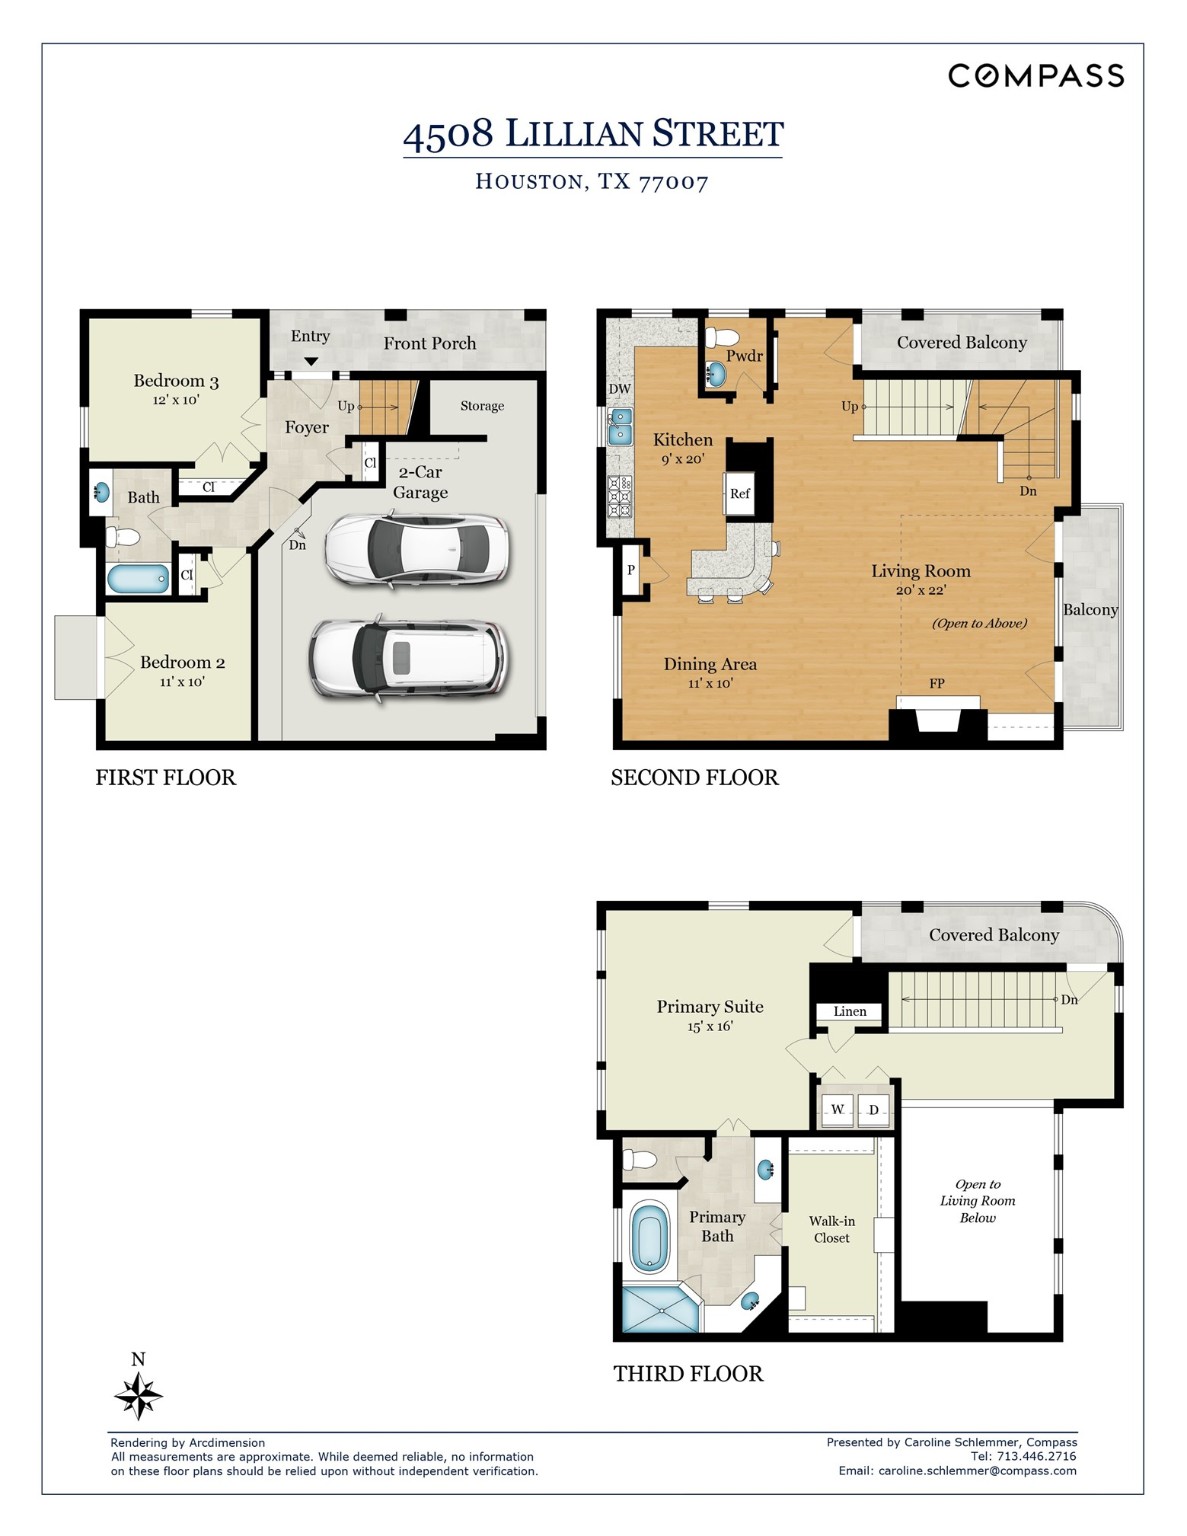 Floor plan- for marketing purposes only. Buyer to verify dimensions and accuracy.